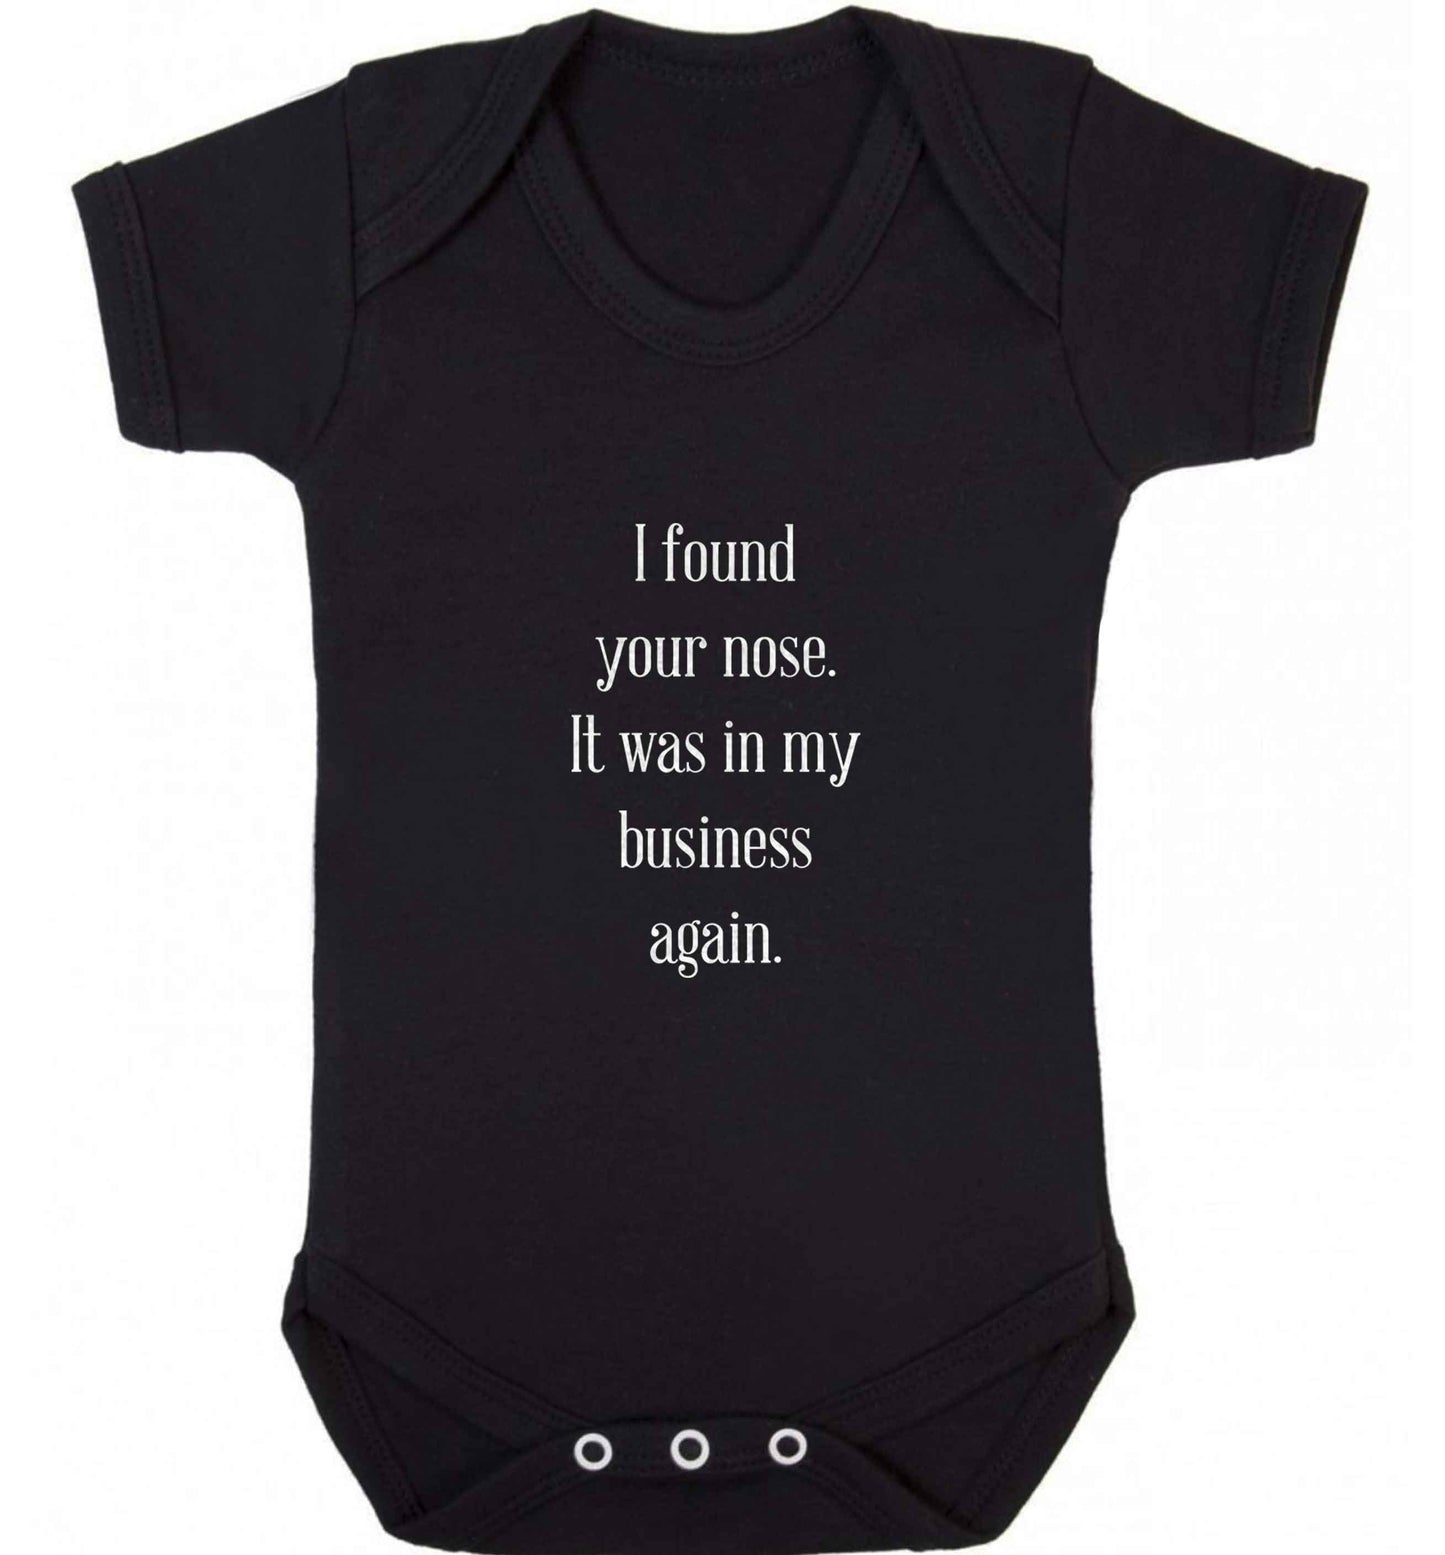 I found your nose it was in my business again baby vest black 18-24 months